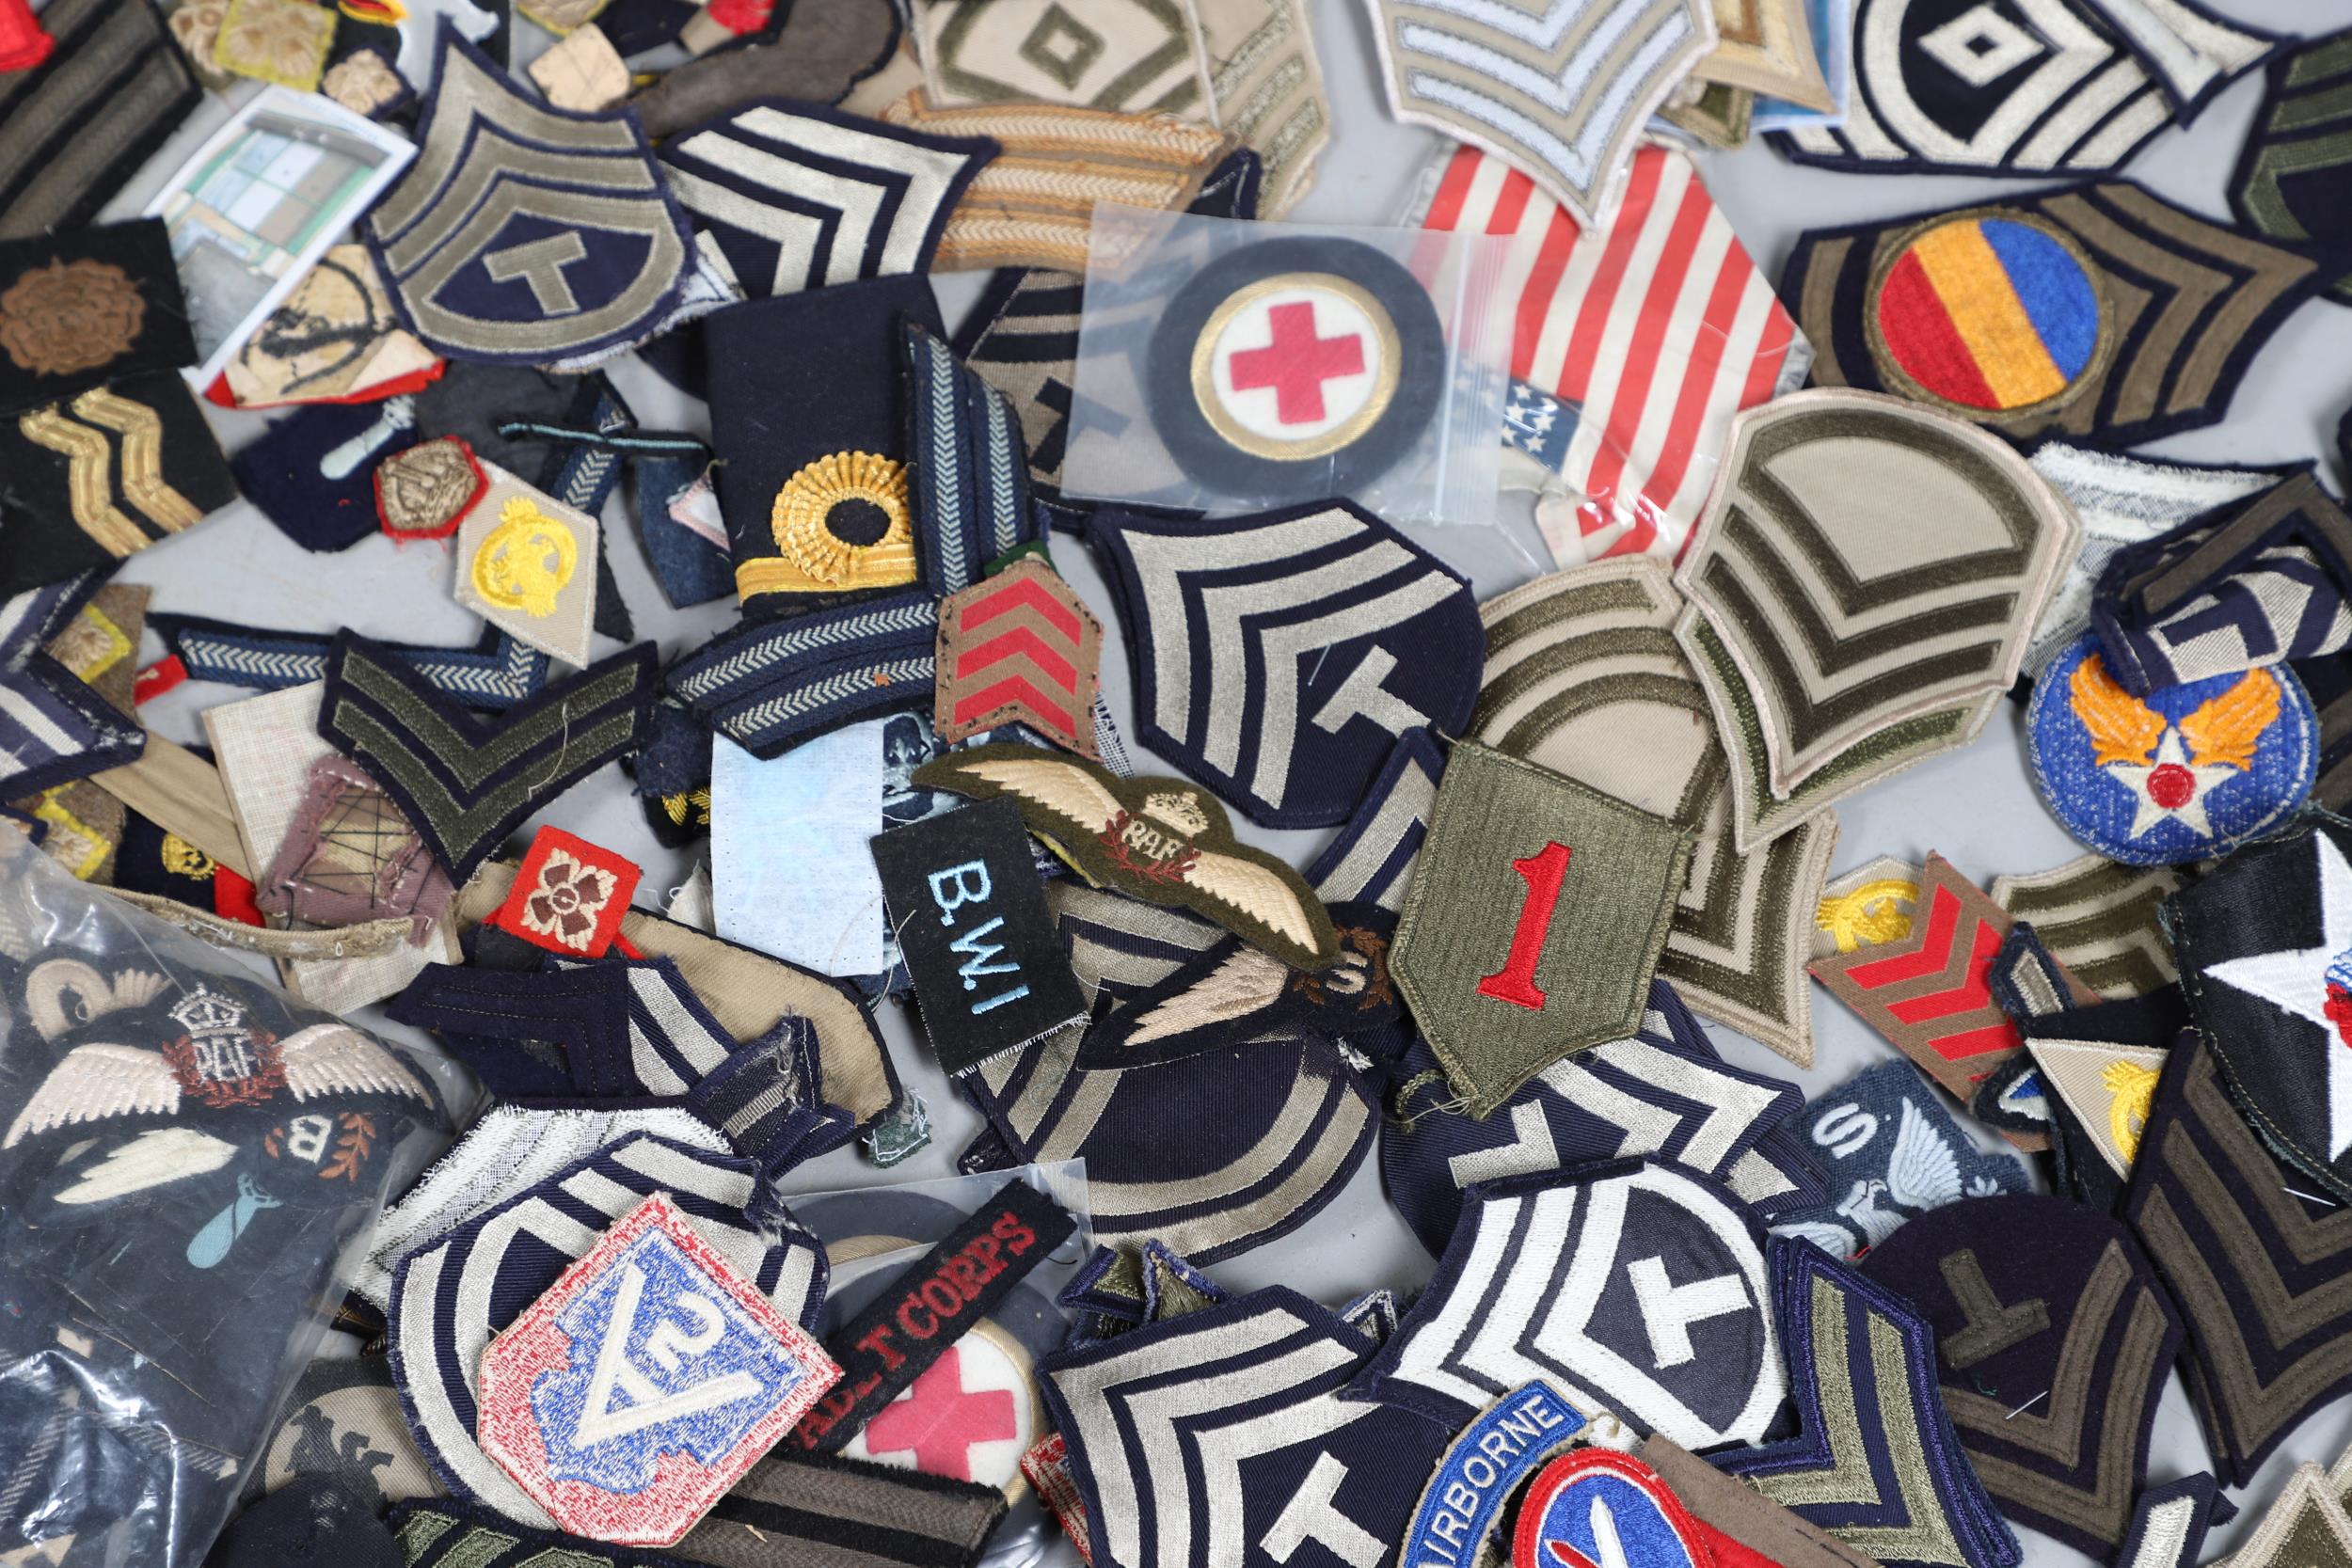 AN EXTENSIVE COLLECTION OF ARMY AND AIR FORCE UNIFORM PATCHES AND RANK INSIGNIA. - Image 10 of 14